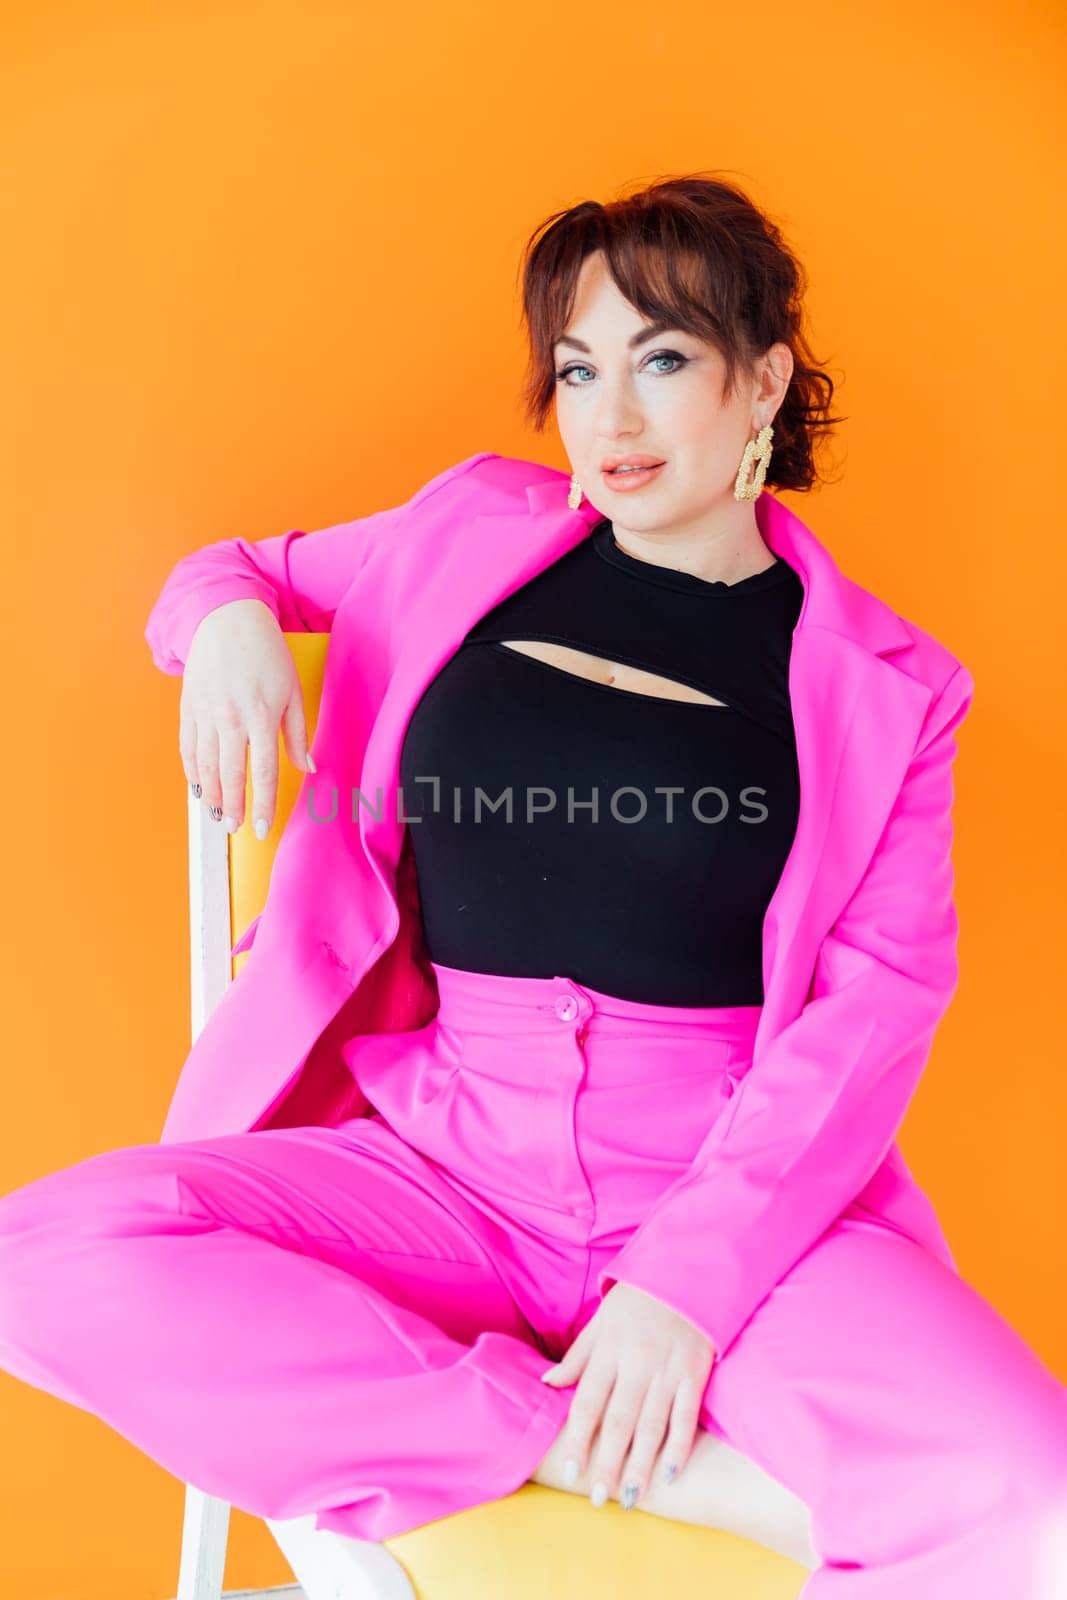 Portrait of a beautiful woman in a purple business suit on a chair